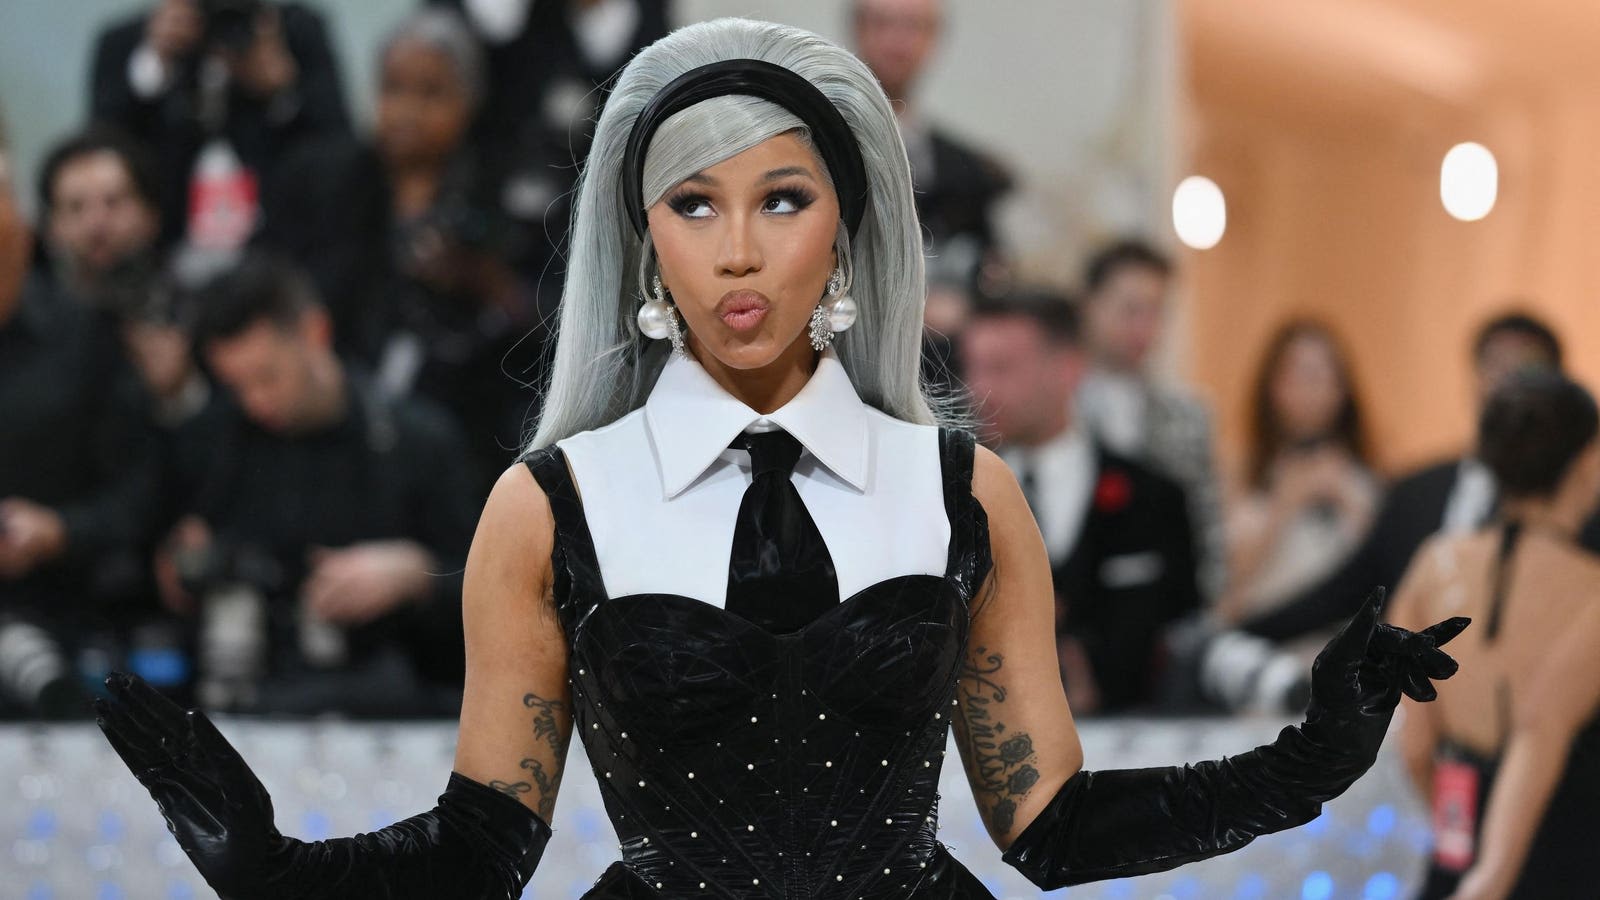 Rapper BIA Accuses Cardi B Of Cheating On Husband Offset In Diss Track: What To Know About Their Beef